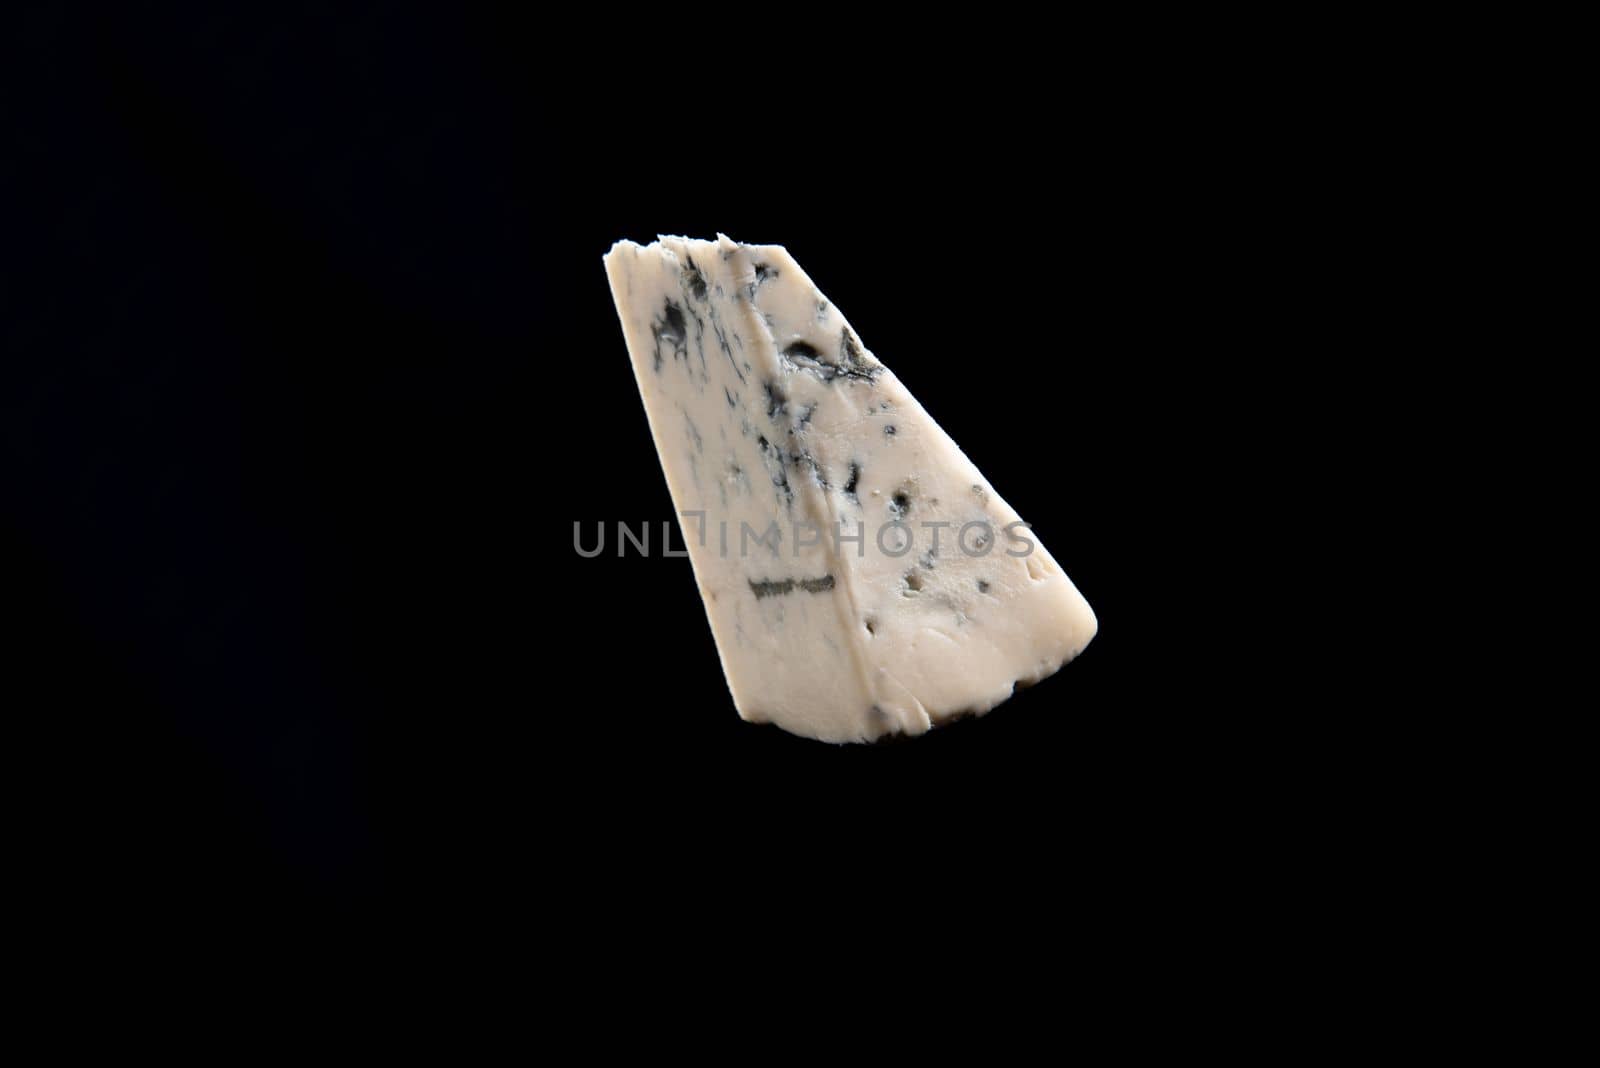 Blue cheese, dor bleu or Roquefort mold cheese on black isolate, lifestyle food by gulyaevstudio